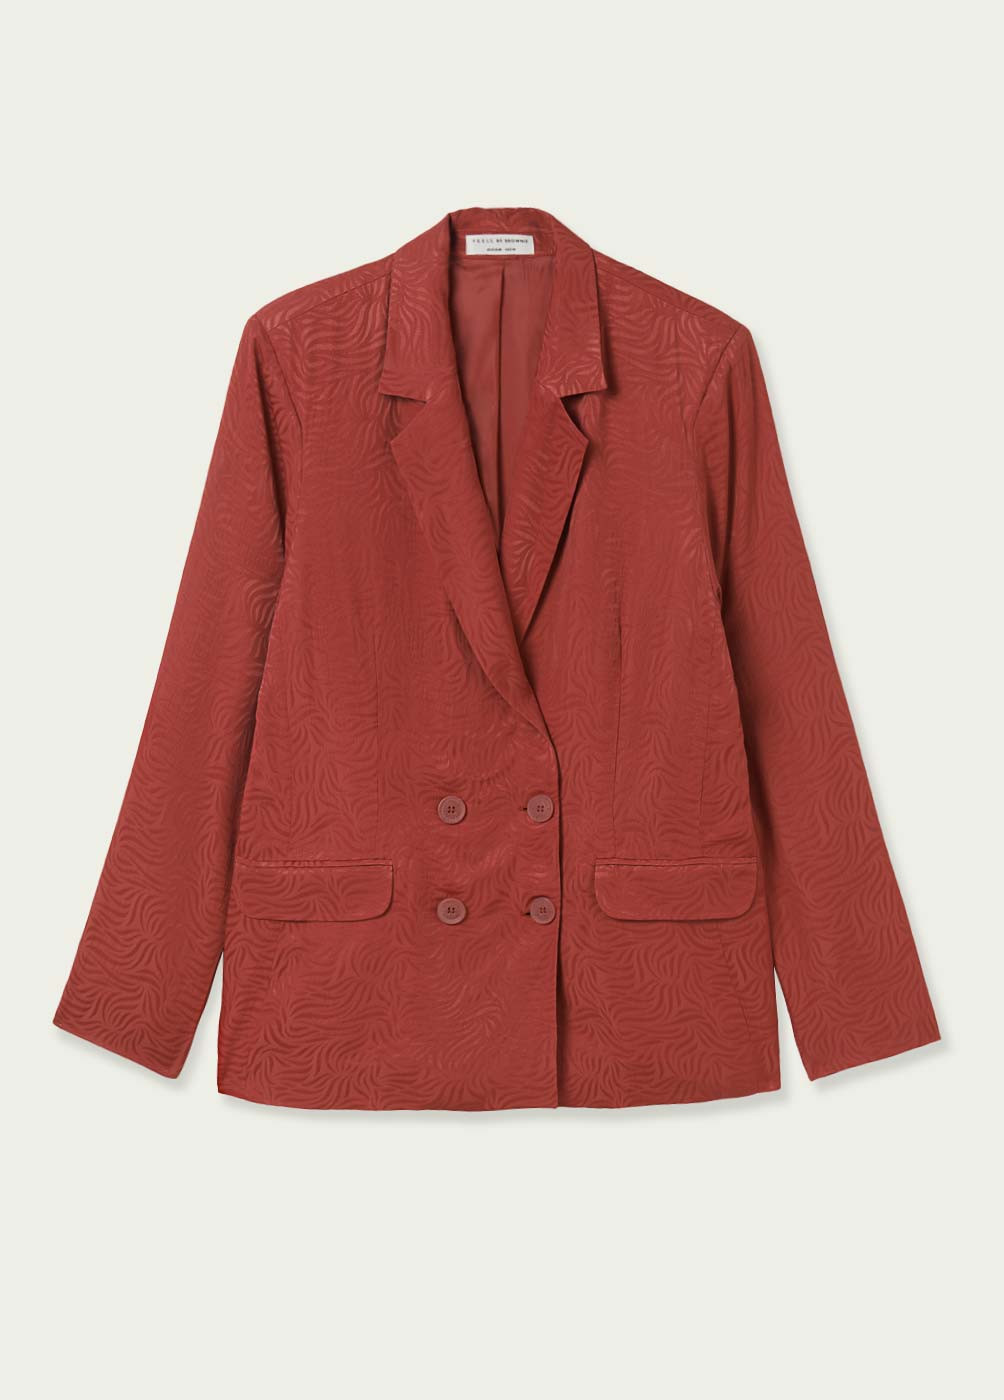 BLUR JACQUARD DOUBLE-BREASTED BLAZER